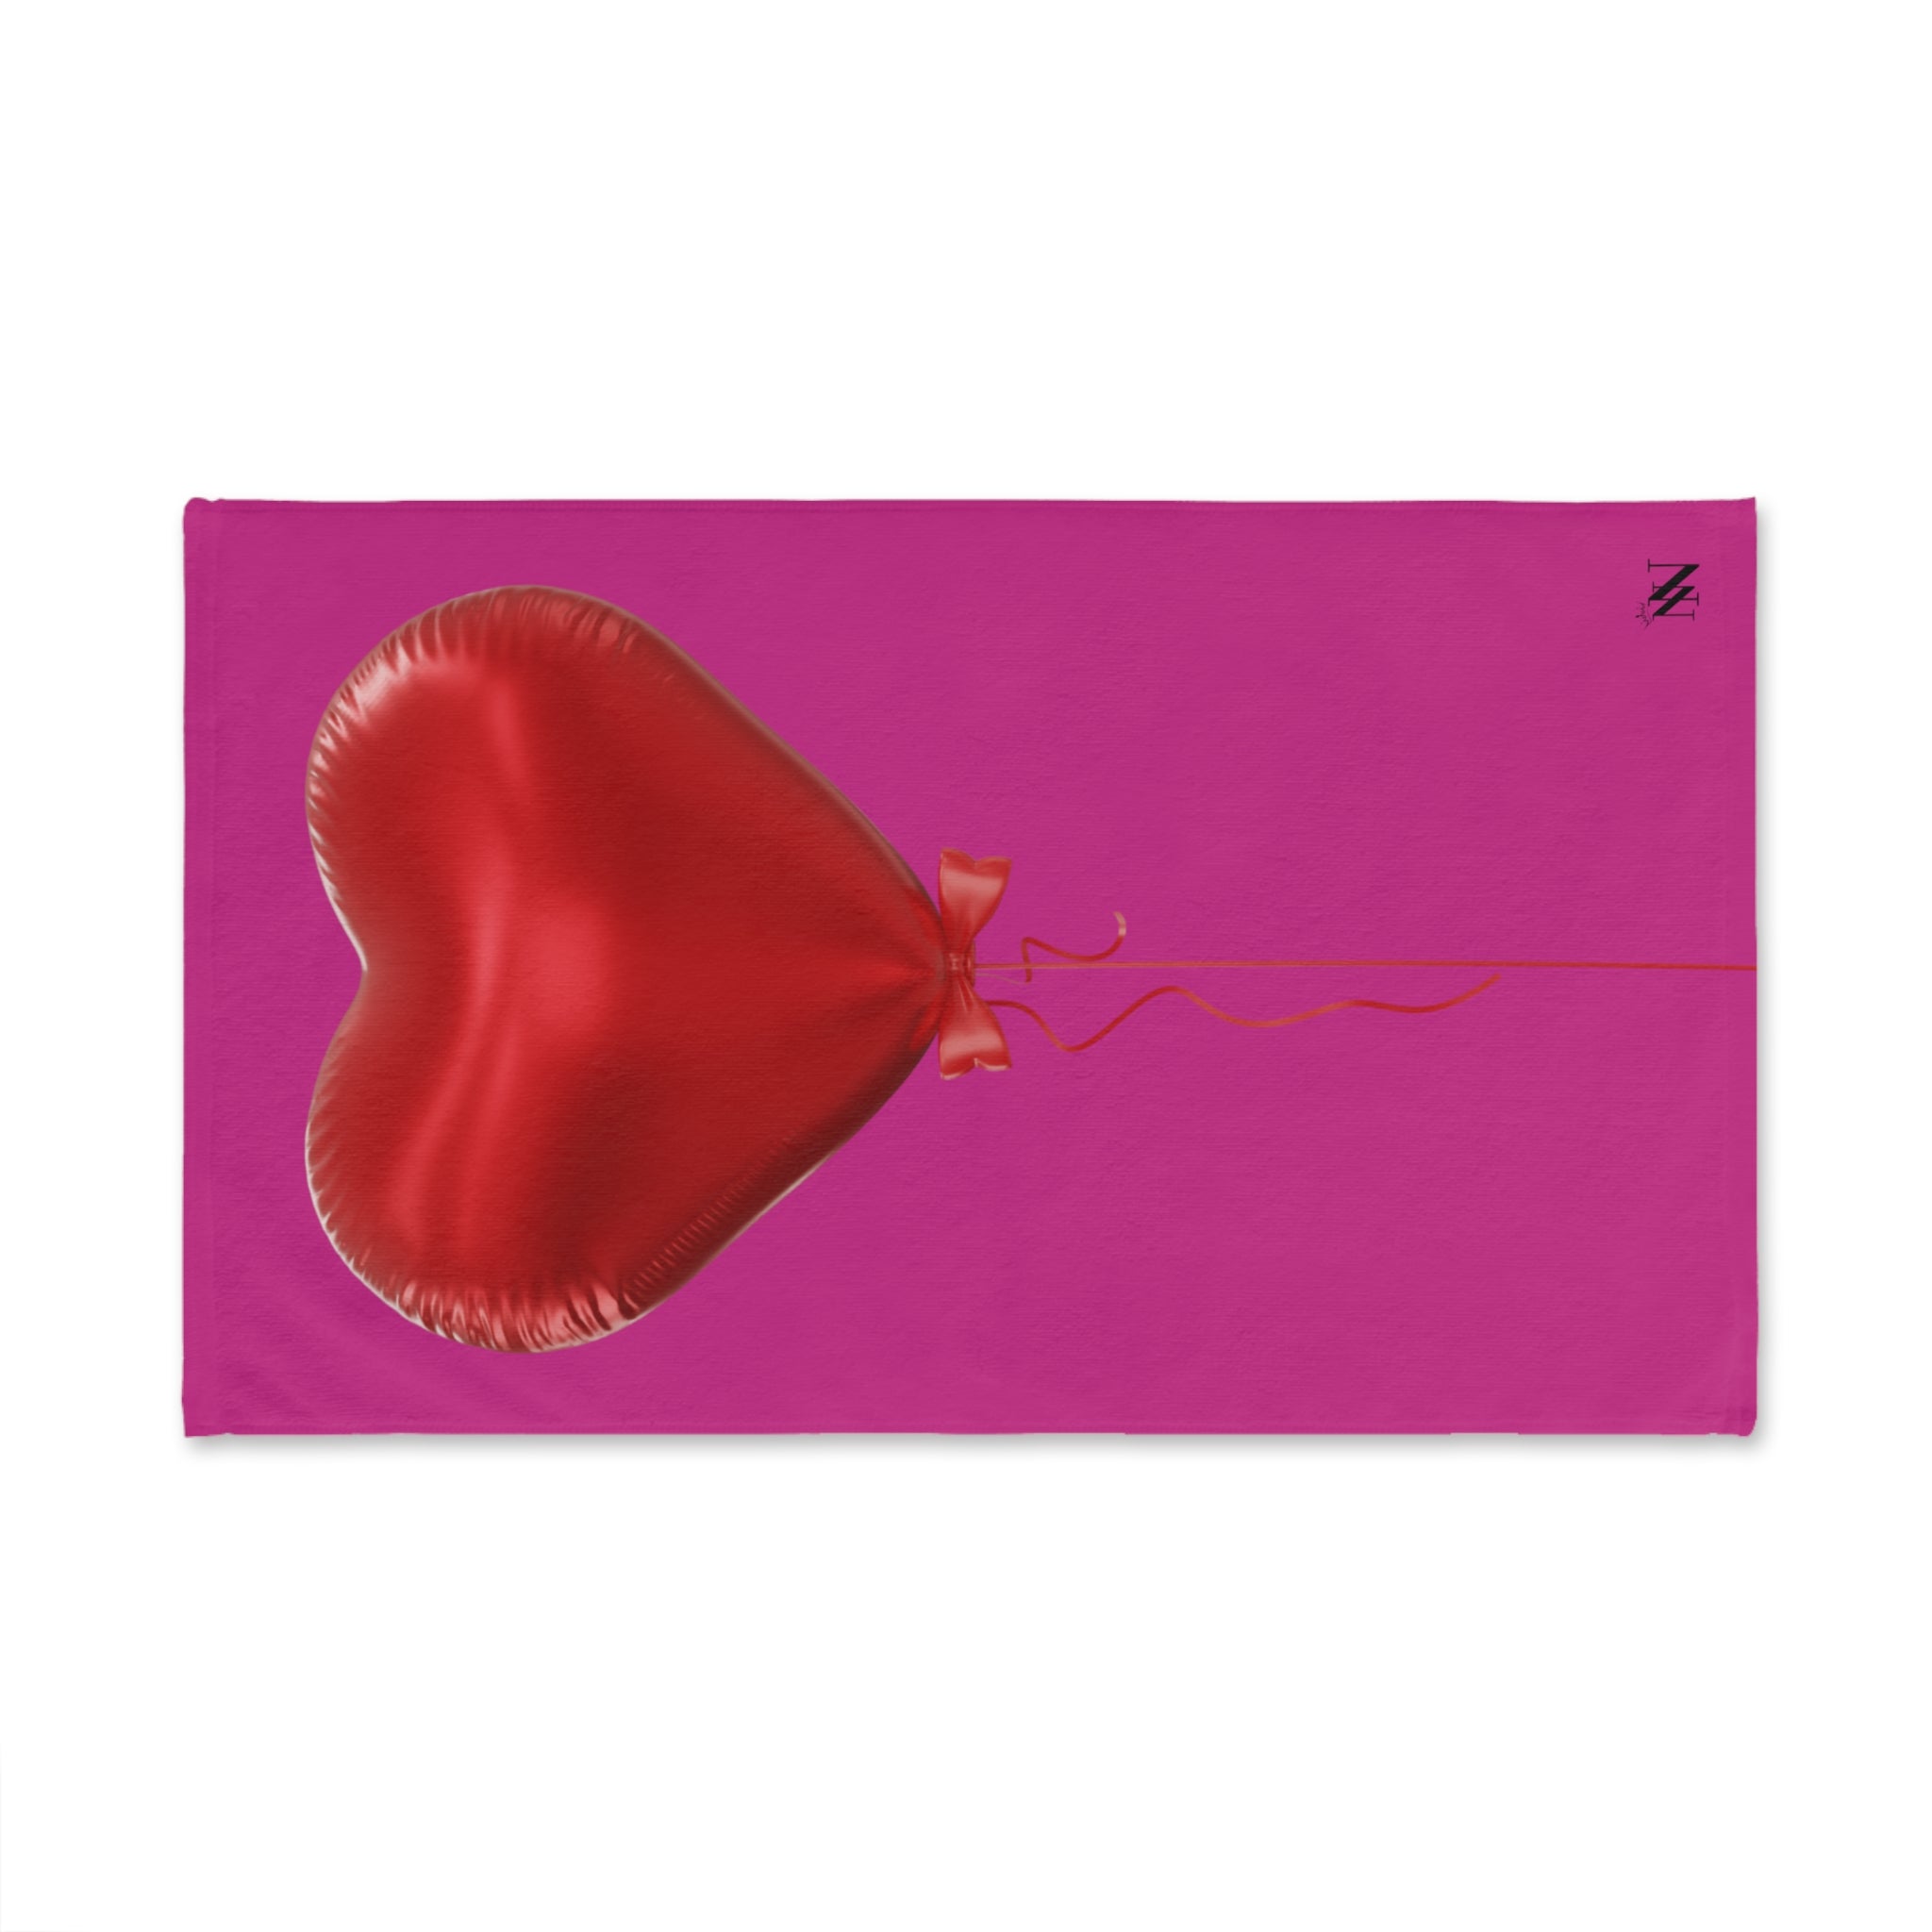 Red Balloon 3D Fuscia | Funny Gifts for Men - Gifts for Him - Birthday Gifts for Men, Him, Husband, Boyfriend, New Couple Gifts, Fathers & Valentines Day Gifts, Hand Towels NECTAR NAPKINS